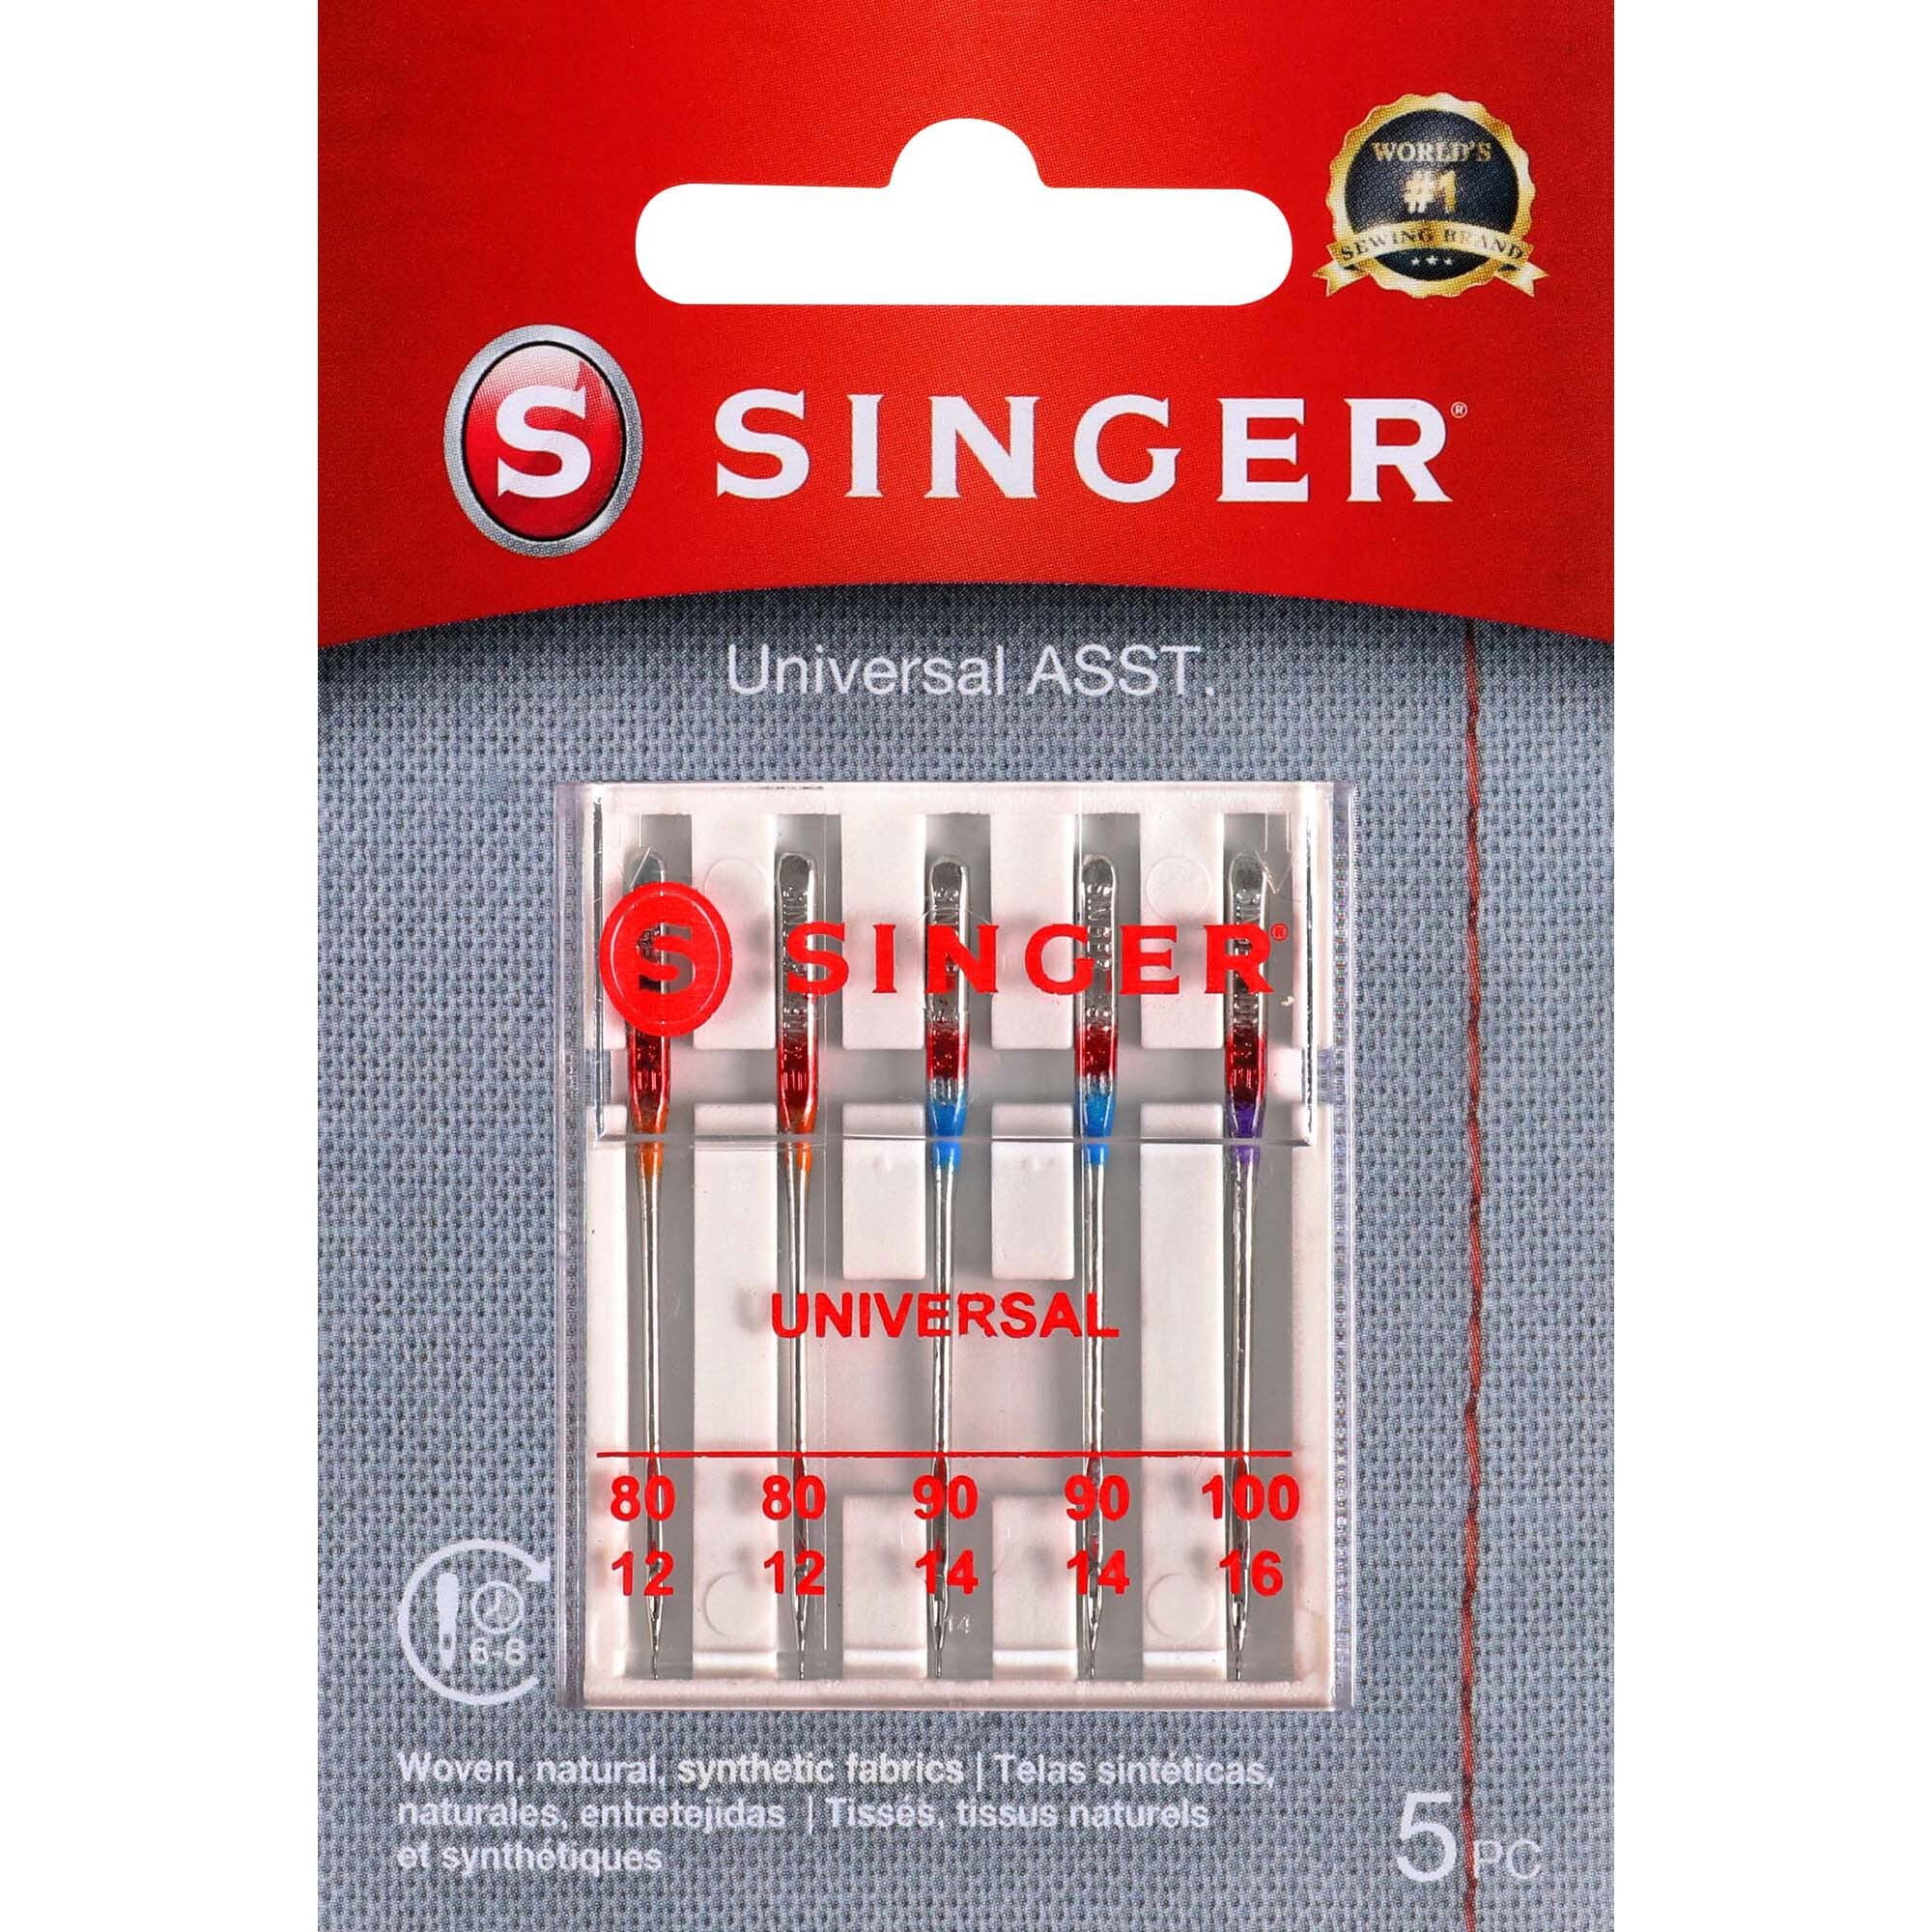 SINGER Regular Point Sewing Machine Needles, Size 80/12, 90/14, 100/16 - 5 Count